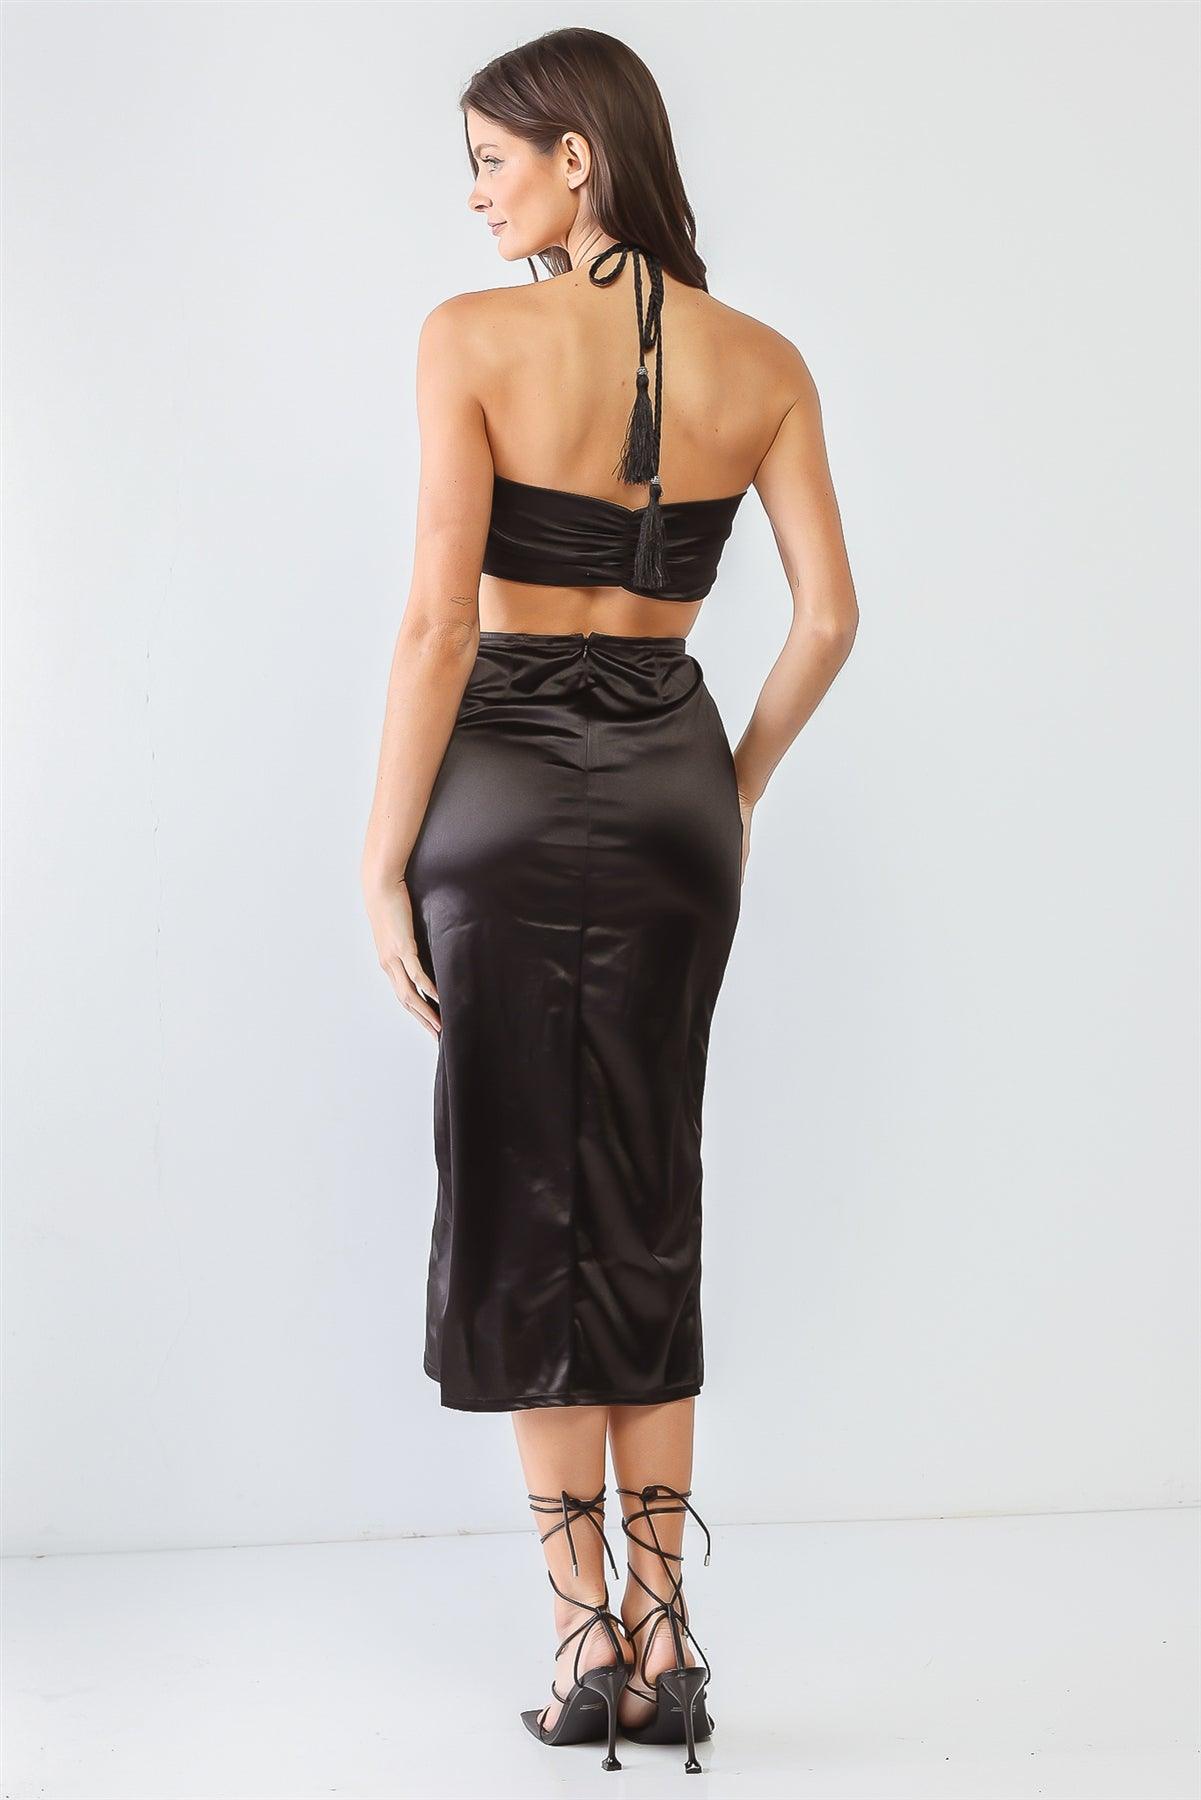 Black Satin Bow Crop Top & High Waist Ruched Midi Skirt With Criss-Cross Strap Set /3-2-1